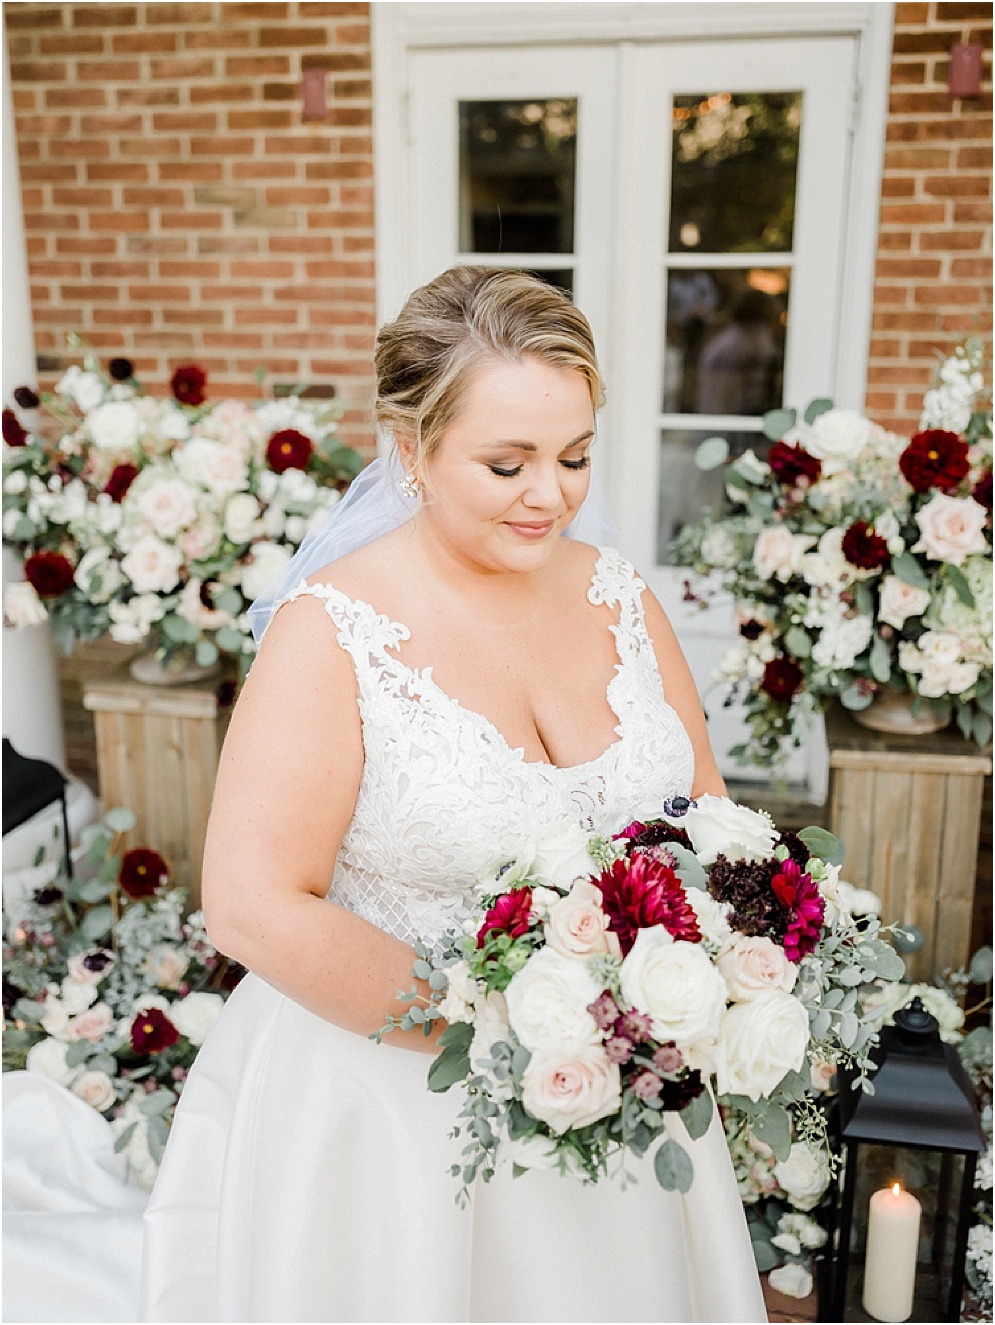 An Eastern Shore wedding in Downtown Easton, featuring deep red and purple hues and an incredibly joyful couple.